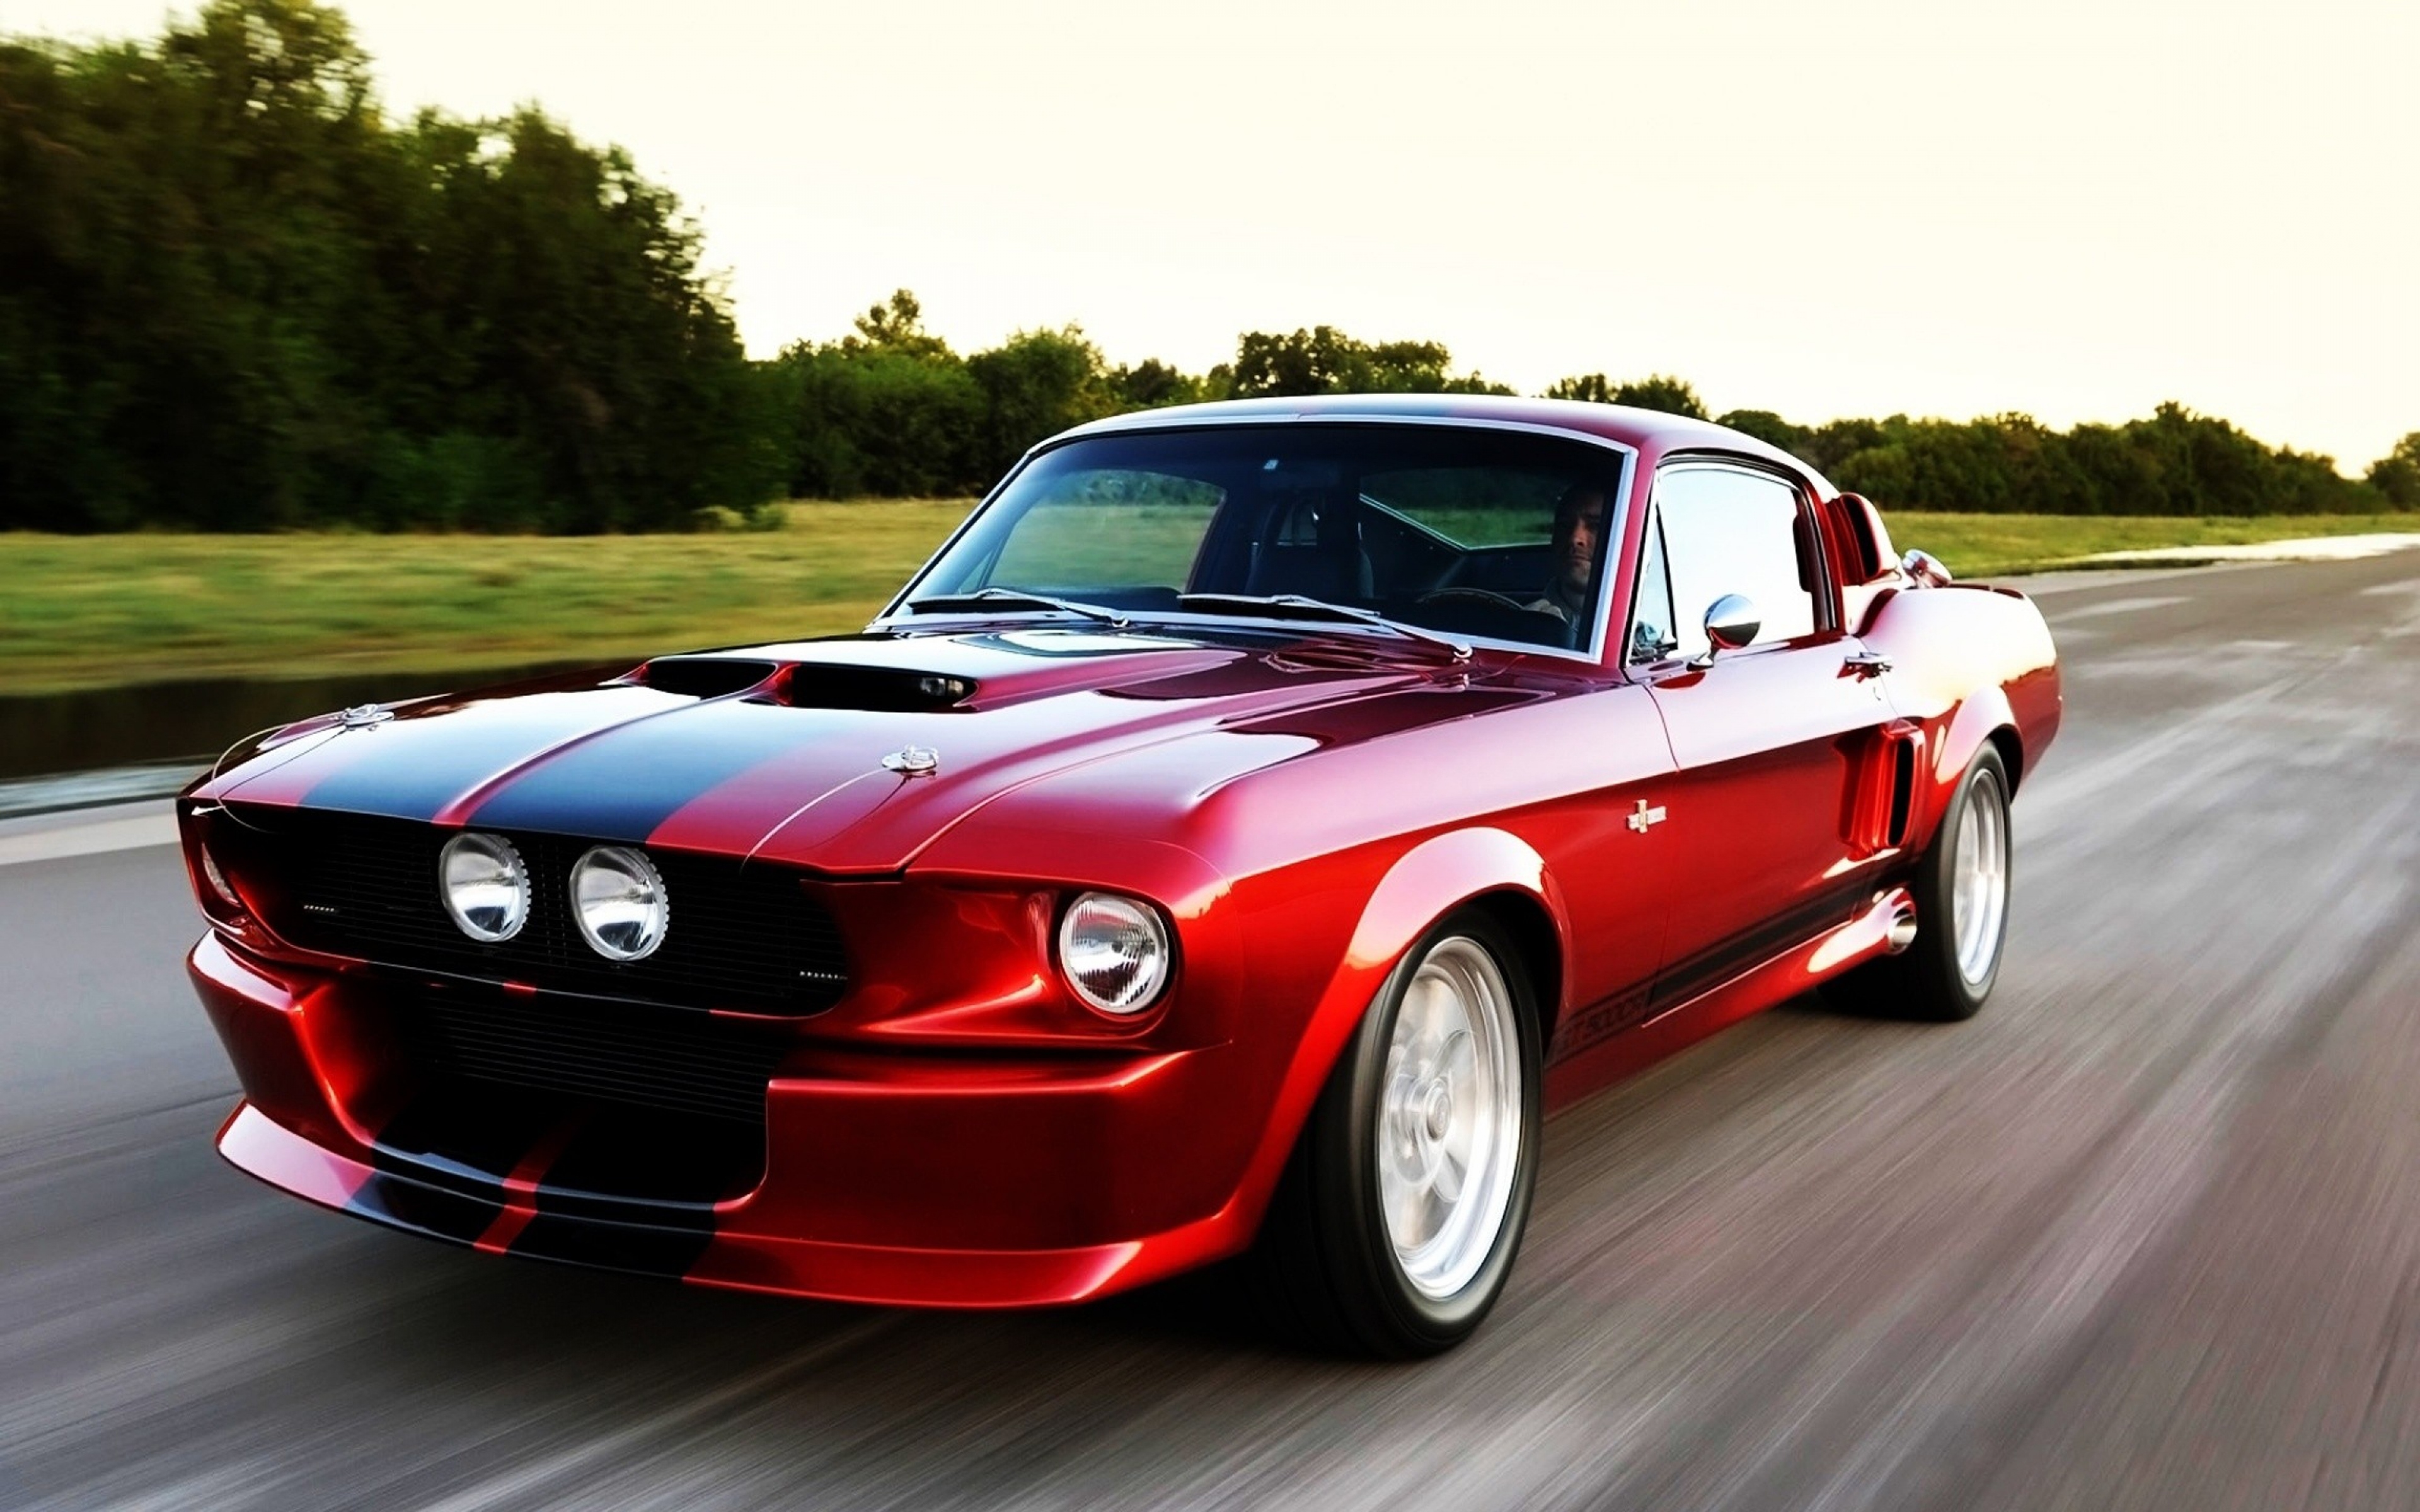 Download Wallpaper 3840x2400 Ford Ford mustang Red car Ultra HD 4K 3840x2400